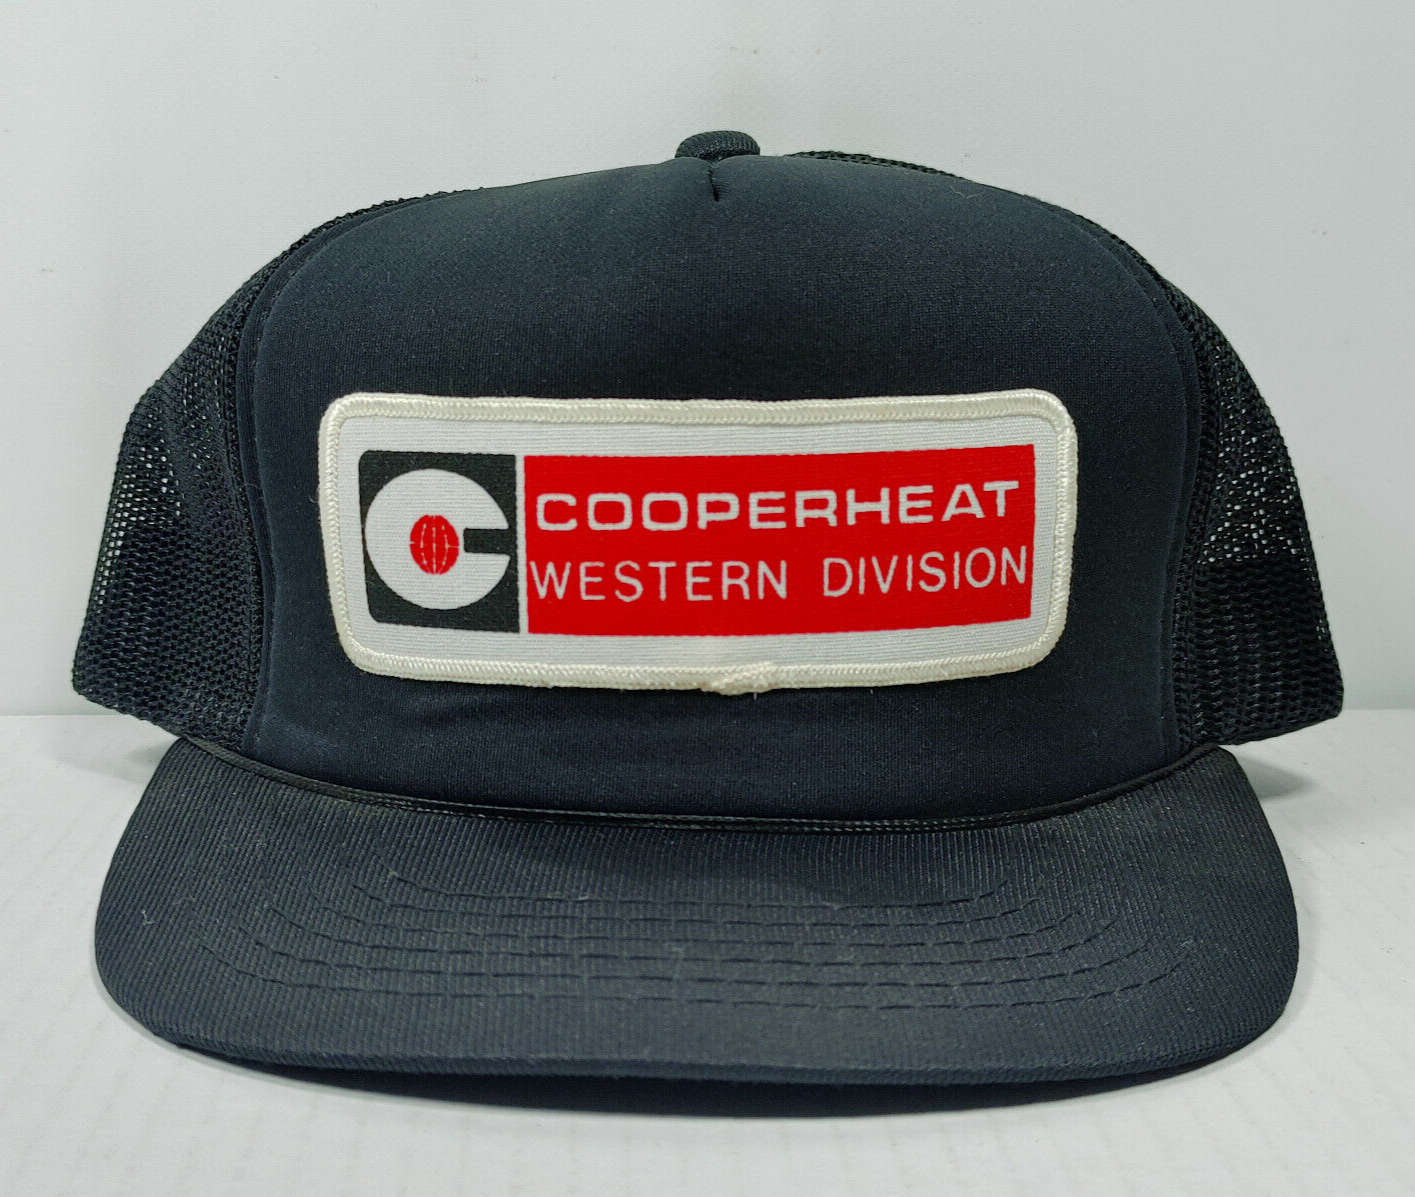 Primary image for Cooperheat Western Division Patch Hat Cap Black YR Designer Award Trucker Snap